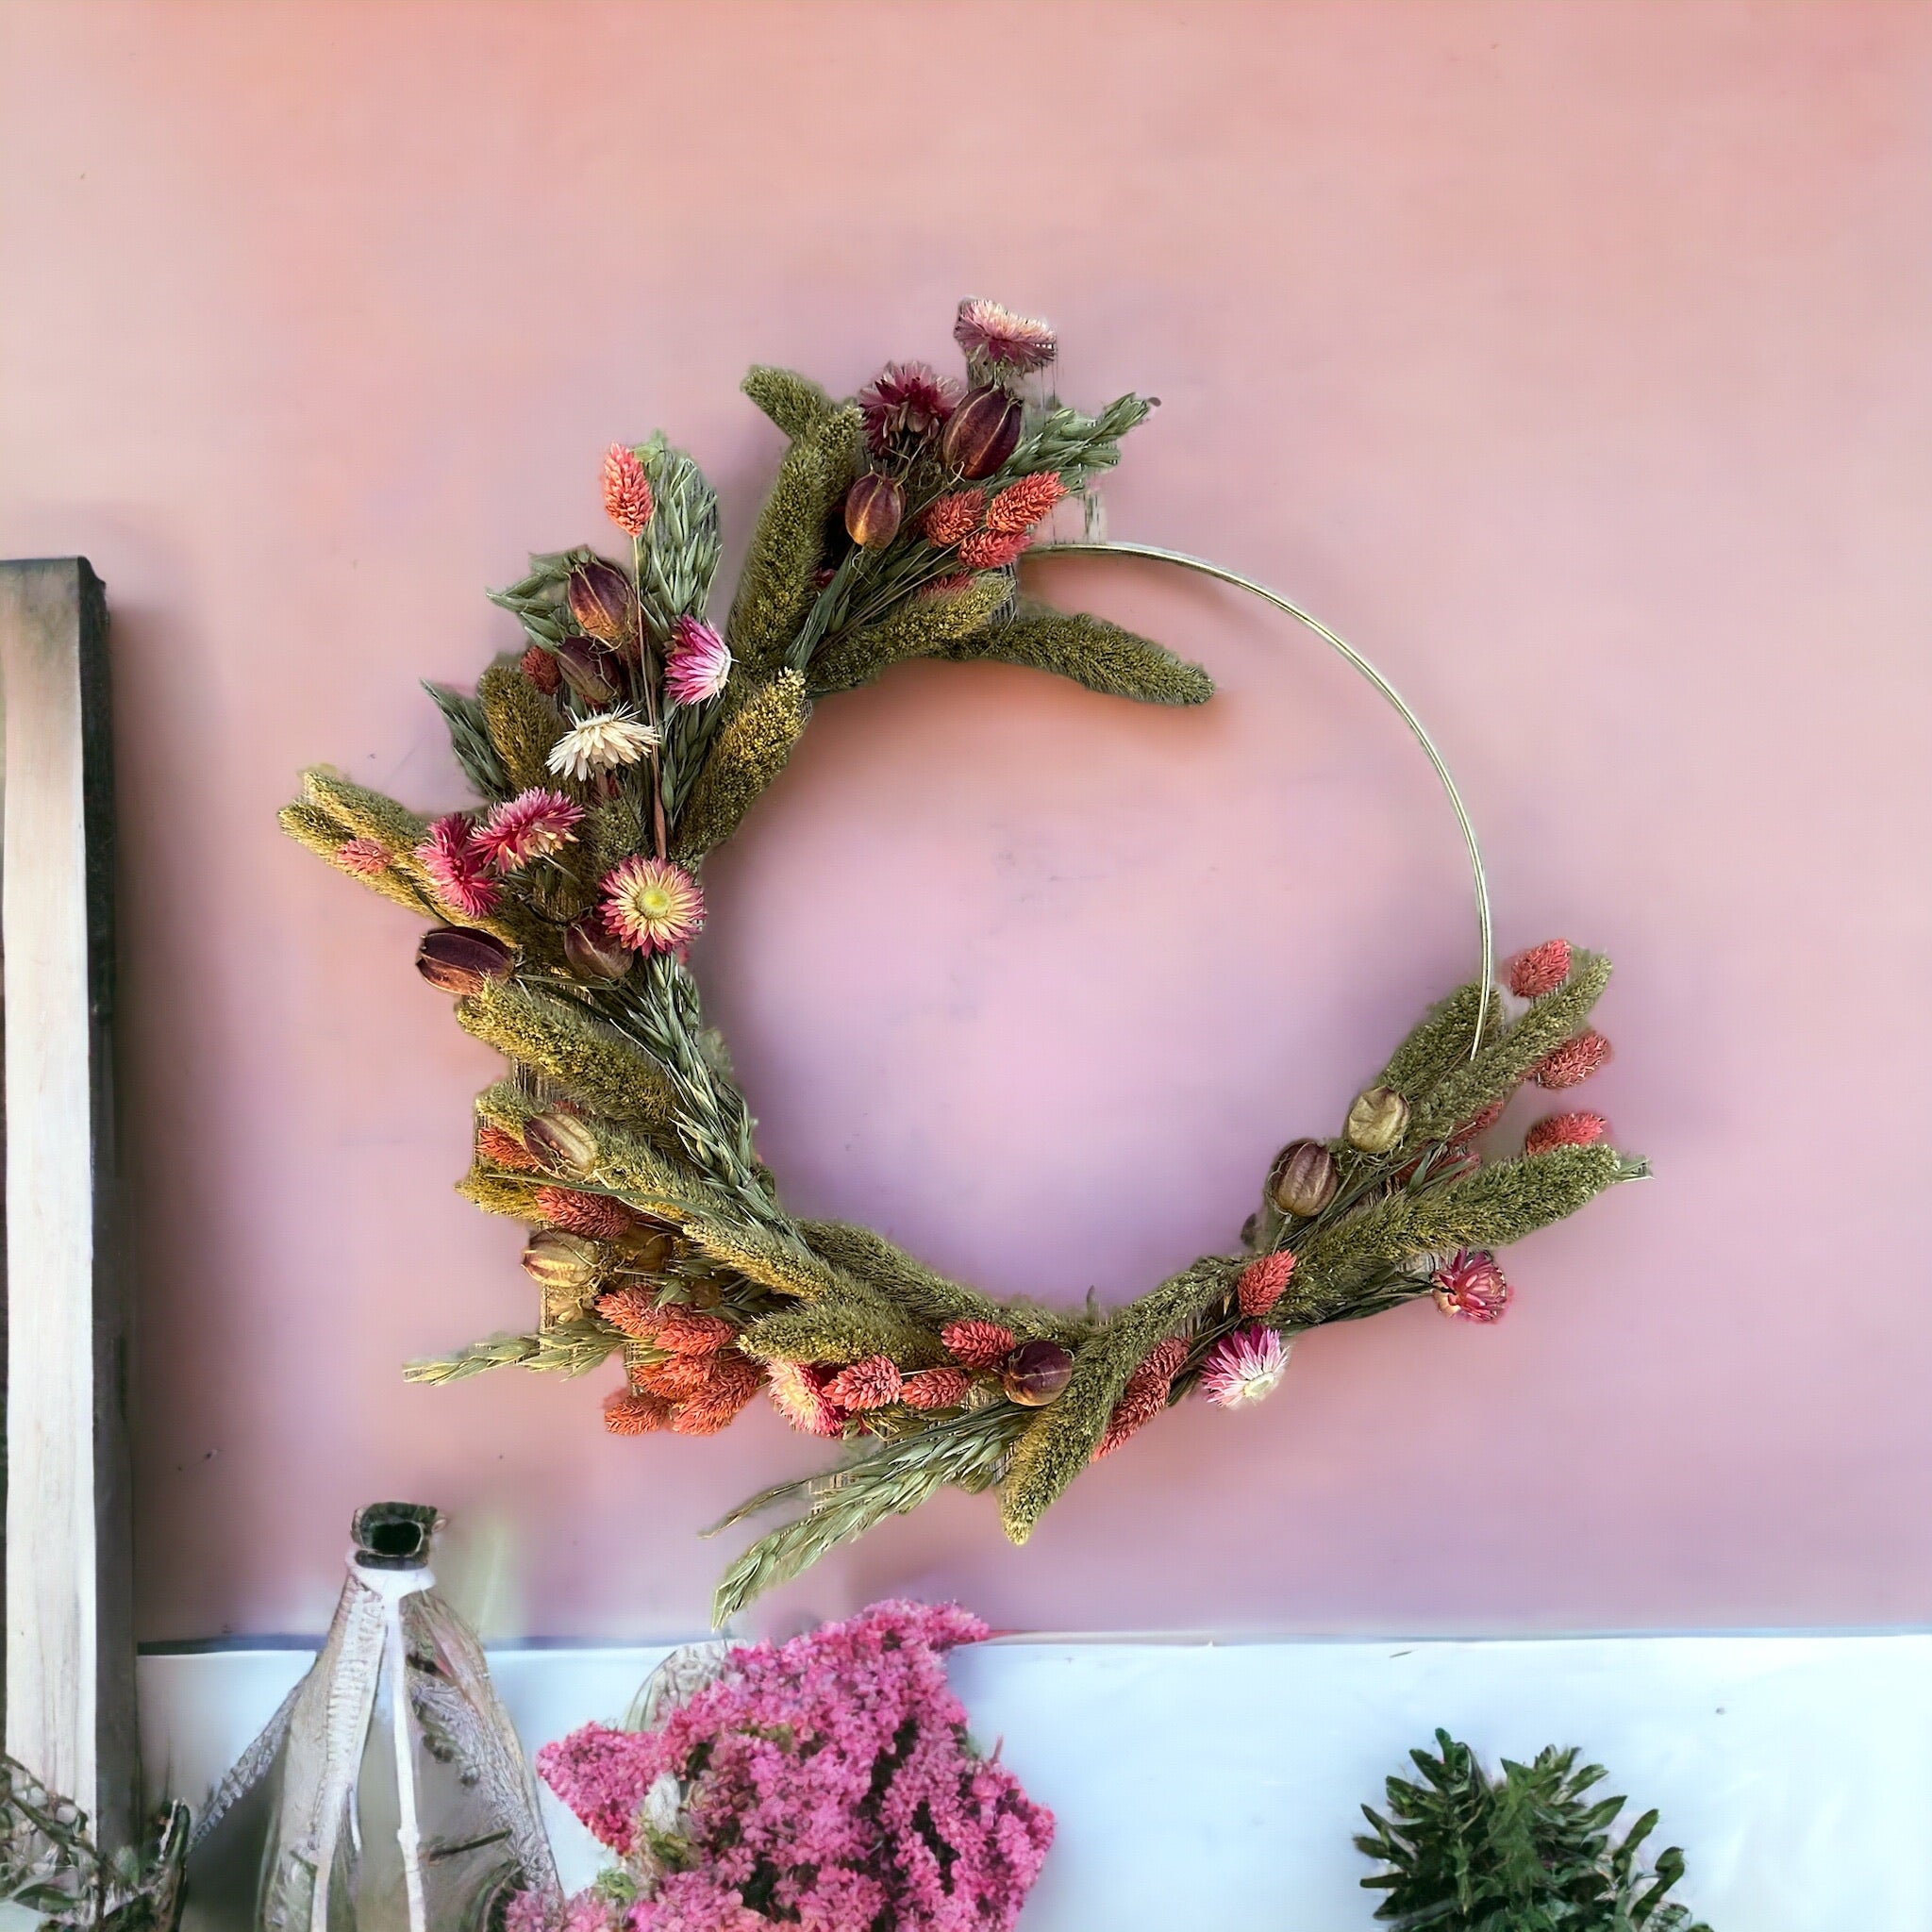 DIY pink and green dried floral wreath kit